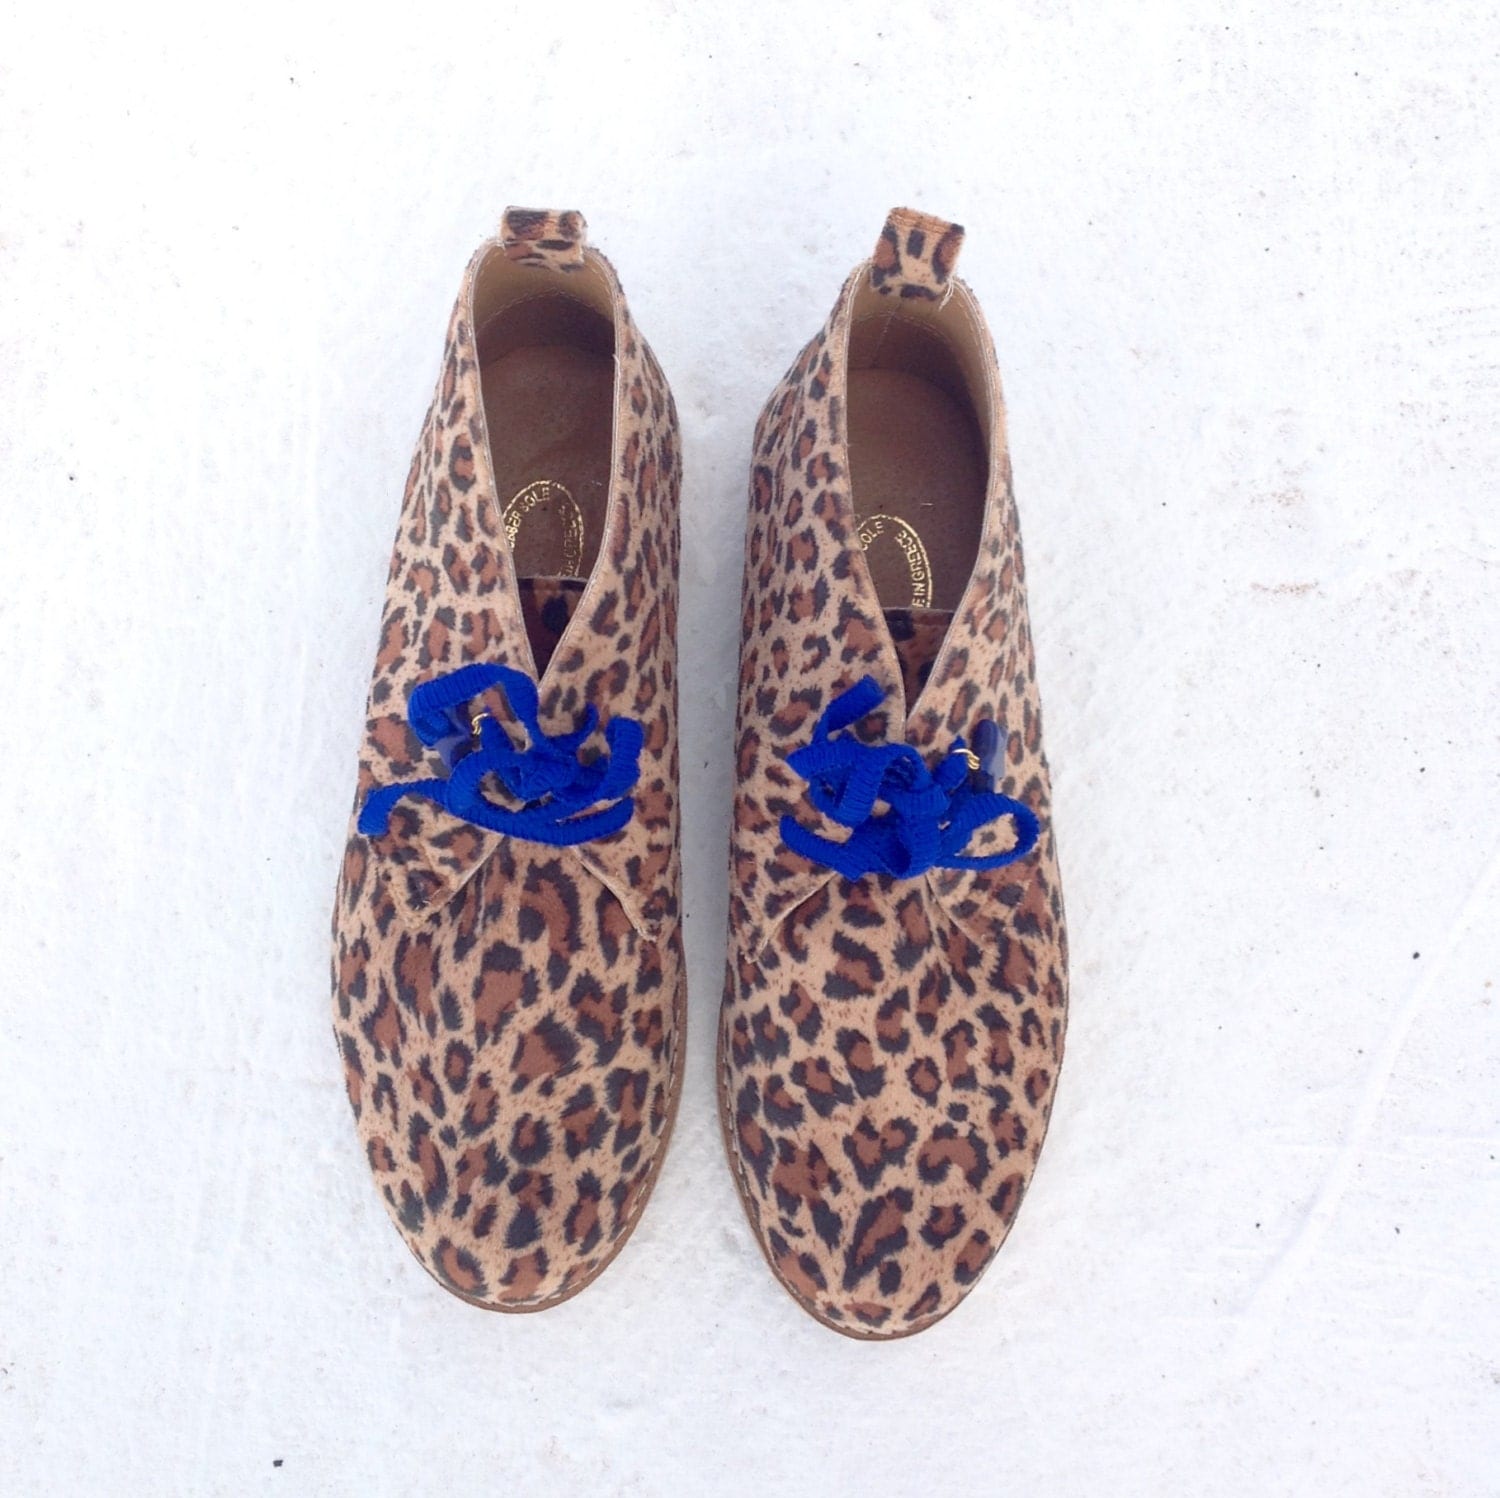 Leopard booties for woman by aeliasandals on Etsy